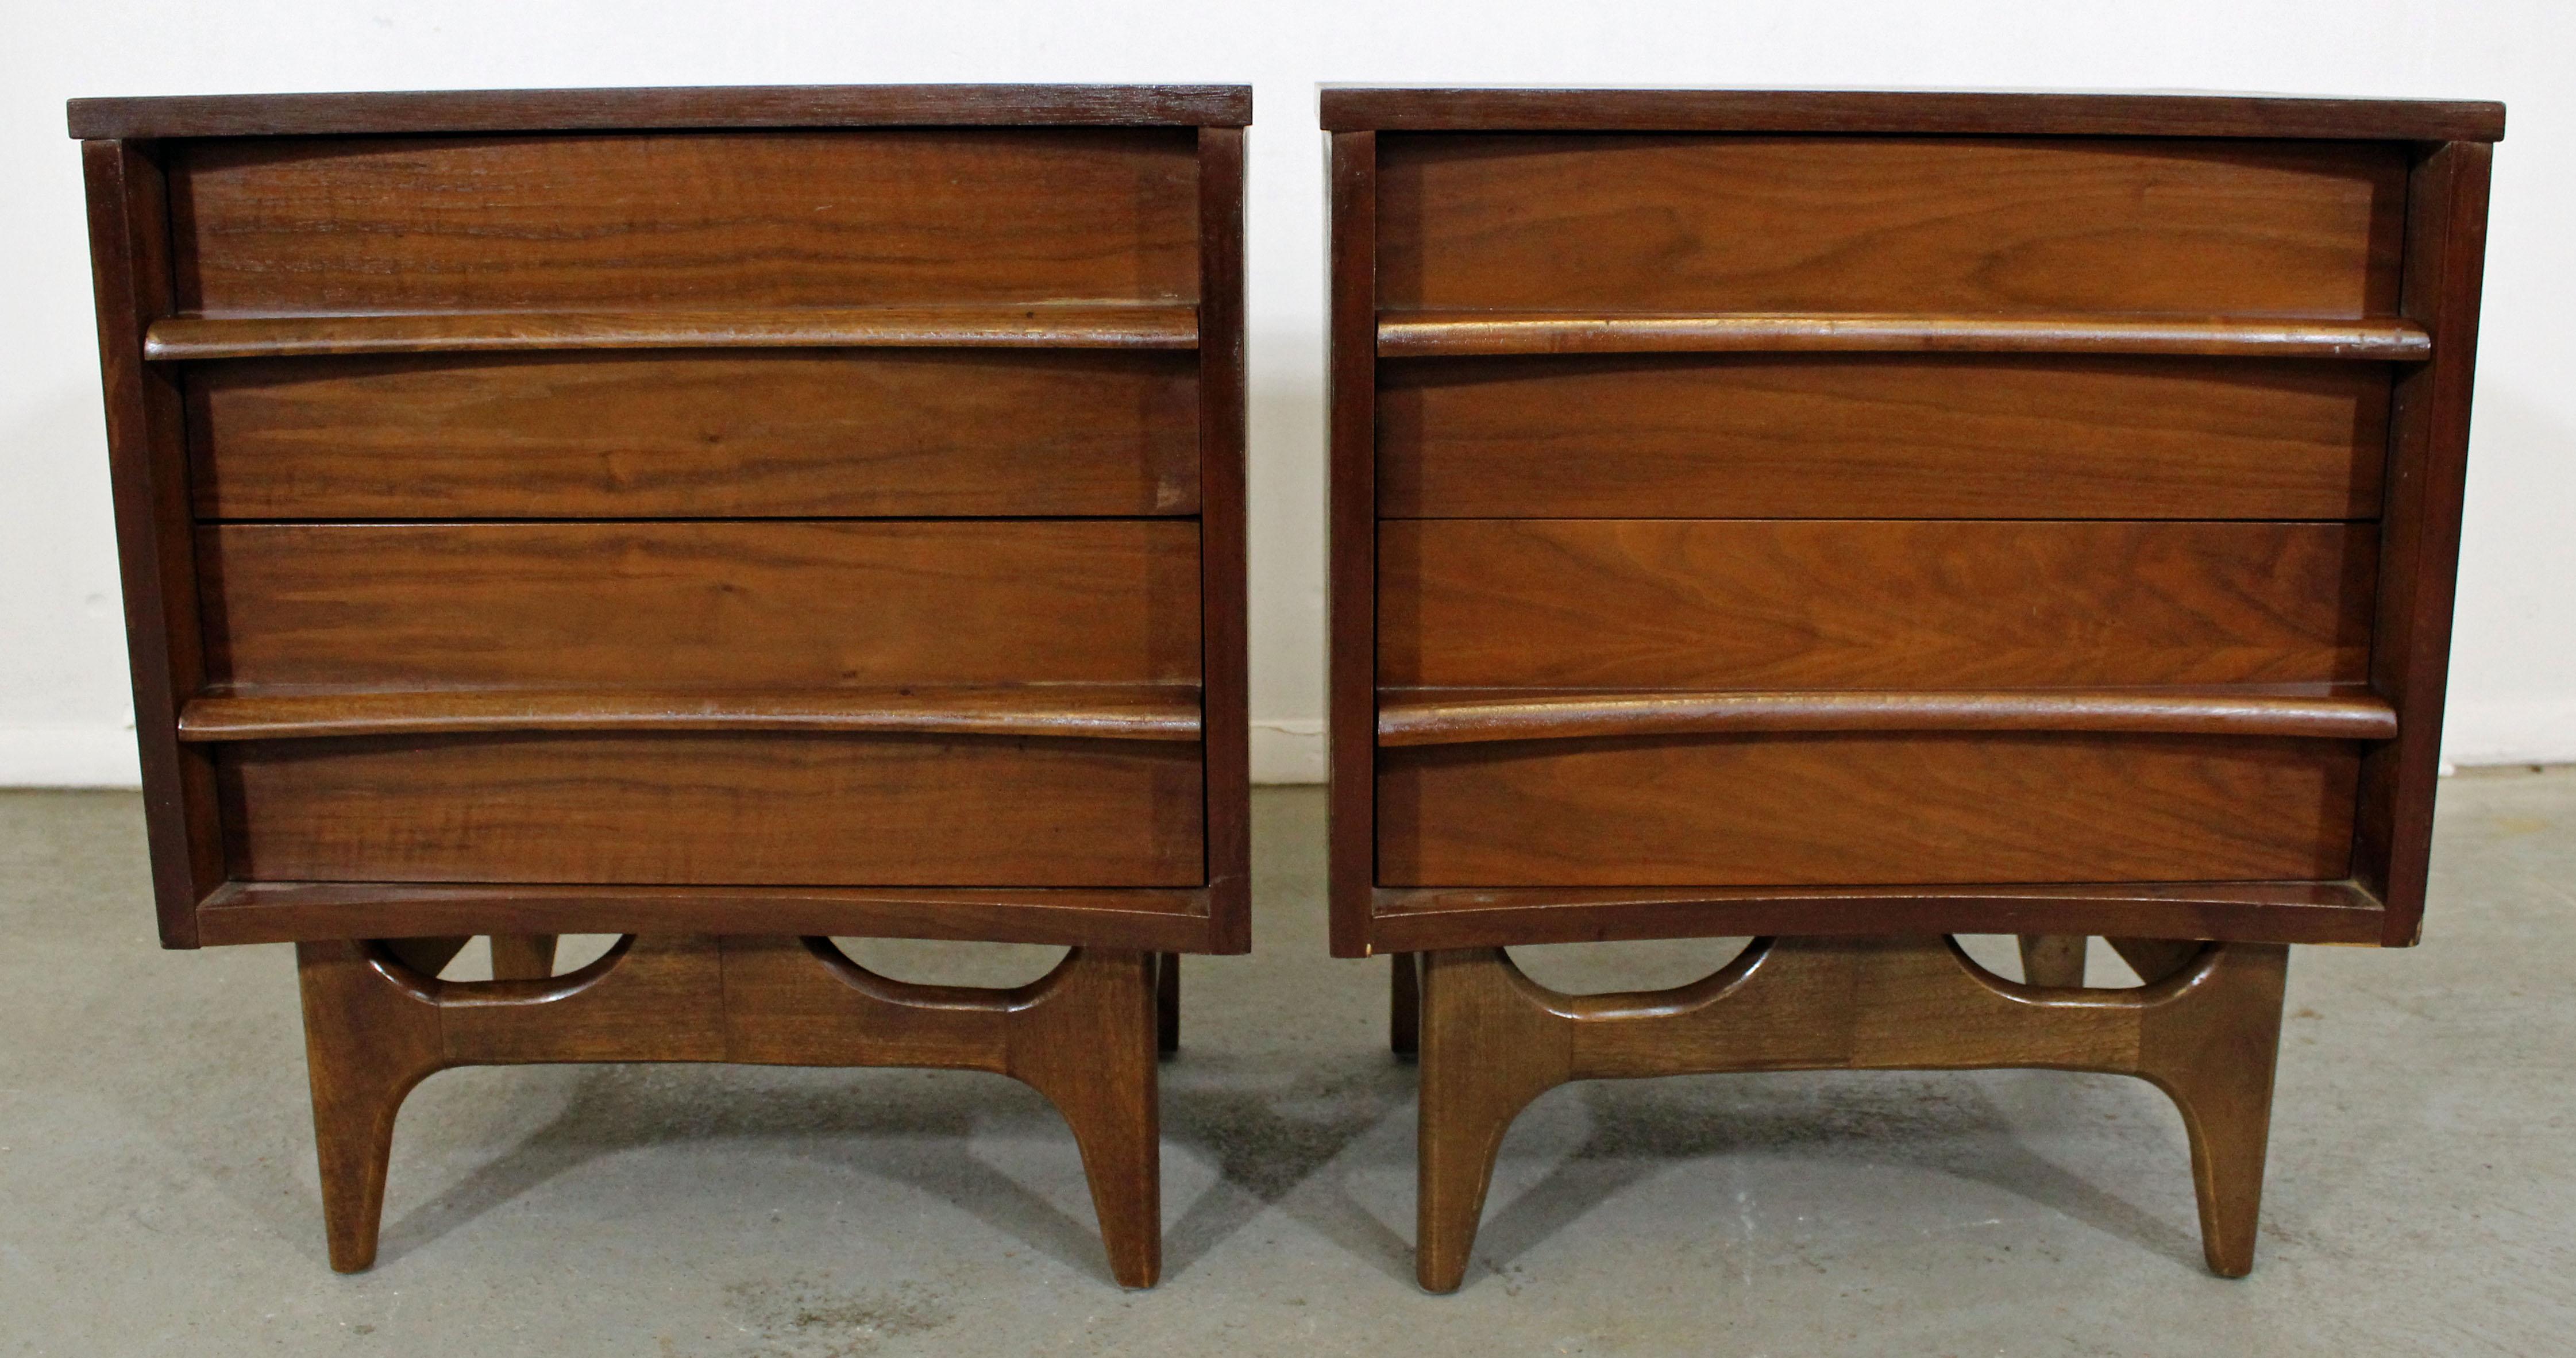 Offered is an excellent example of American Mid-Century Modern design. Includes a pair of walnut nightstands with two dovetailed drawers (each) and sculpted pulls. They are in good condition, show some age wear (refinished tops/sides, some surface